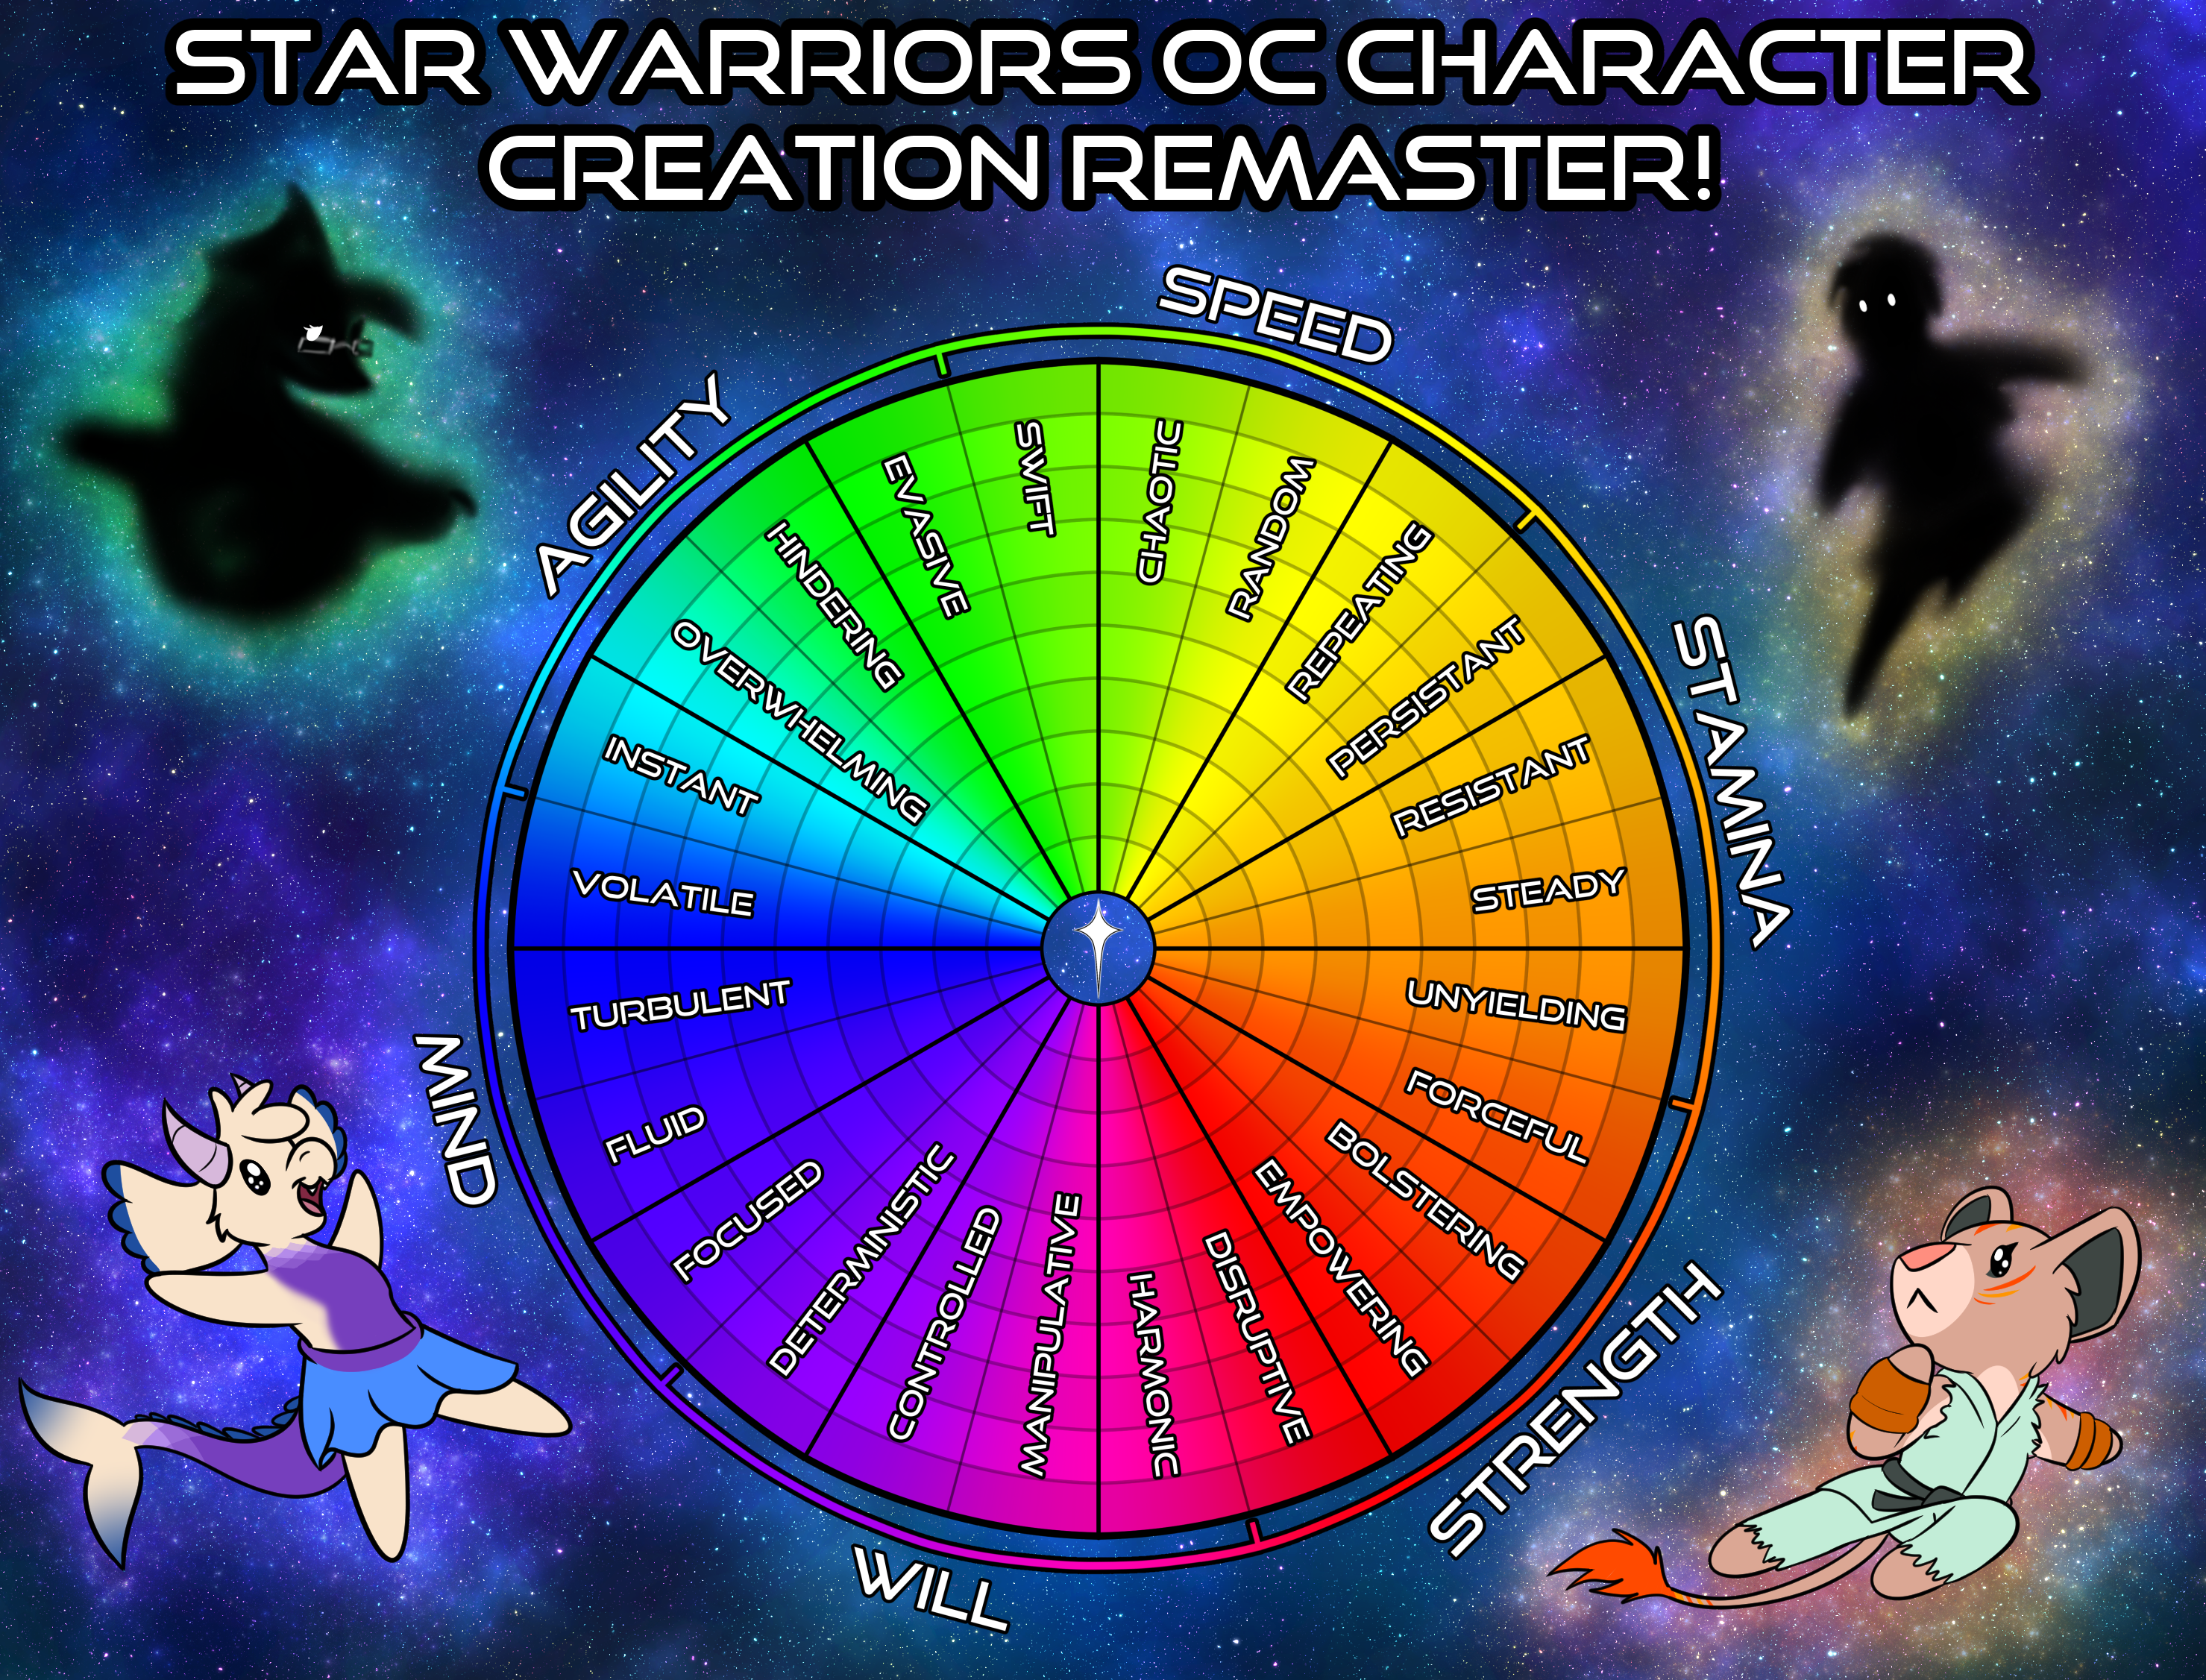 Star Warriors Character Creation Guide Remaster!